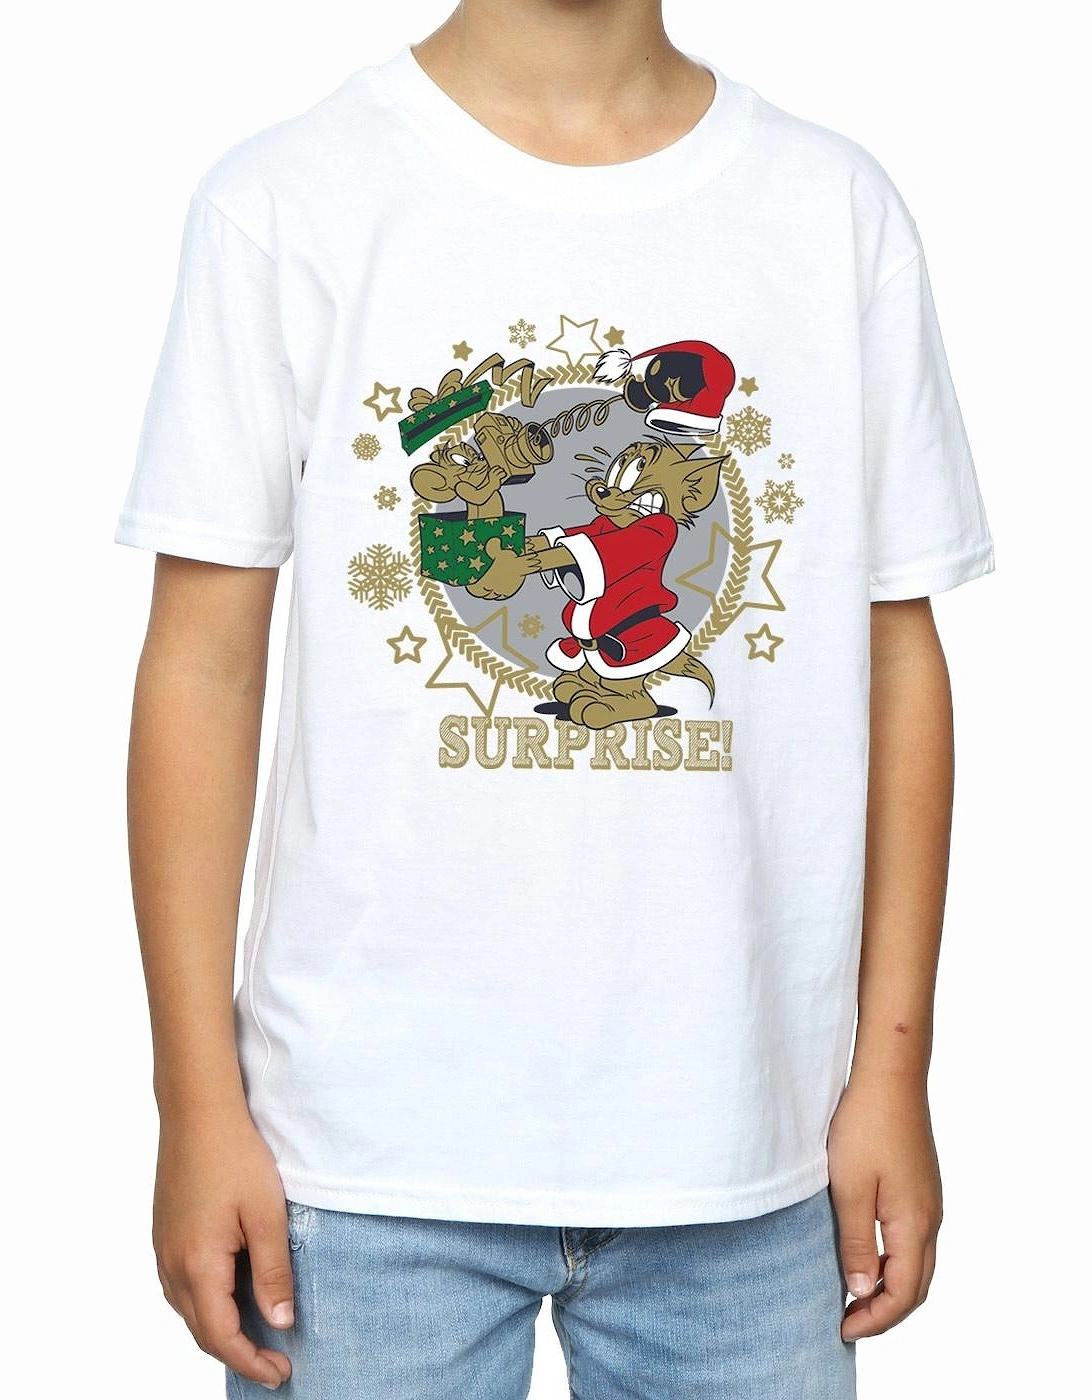 Tom And Jerry Boys Christmas Surprise T-Shirt